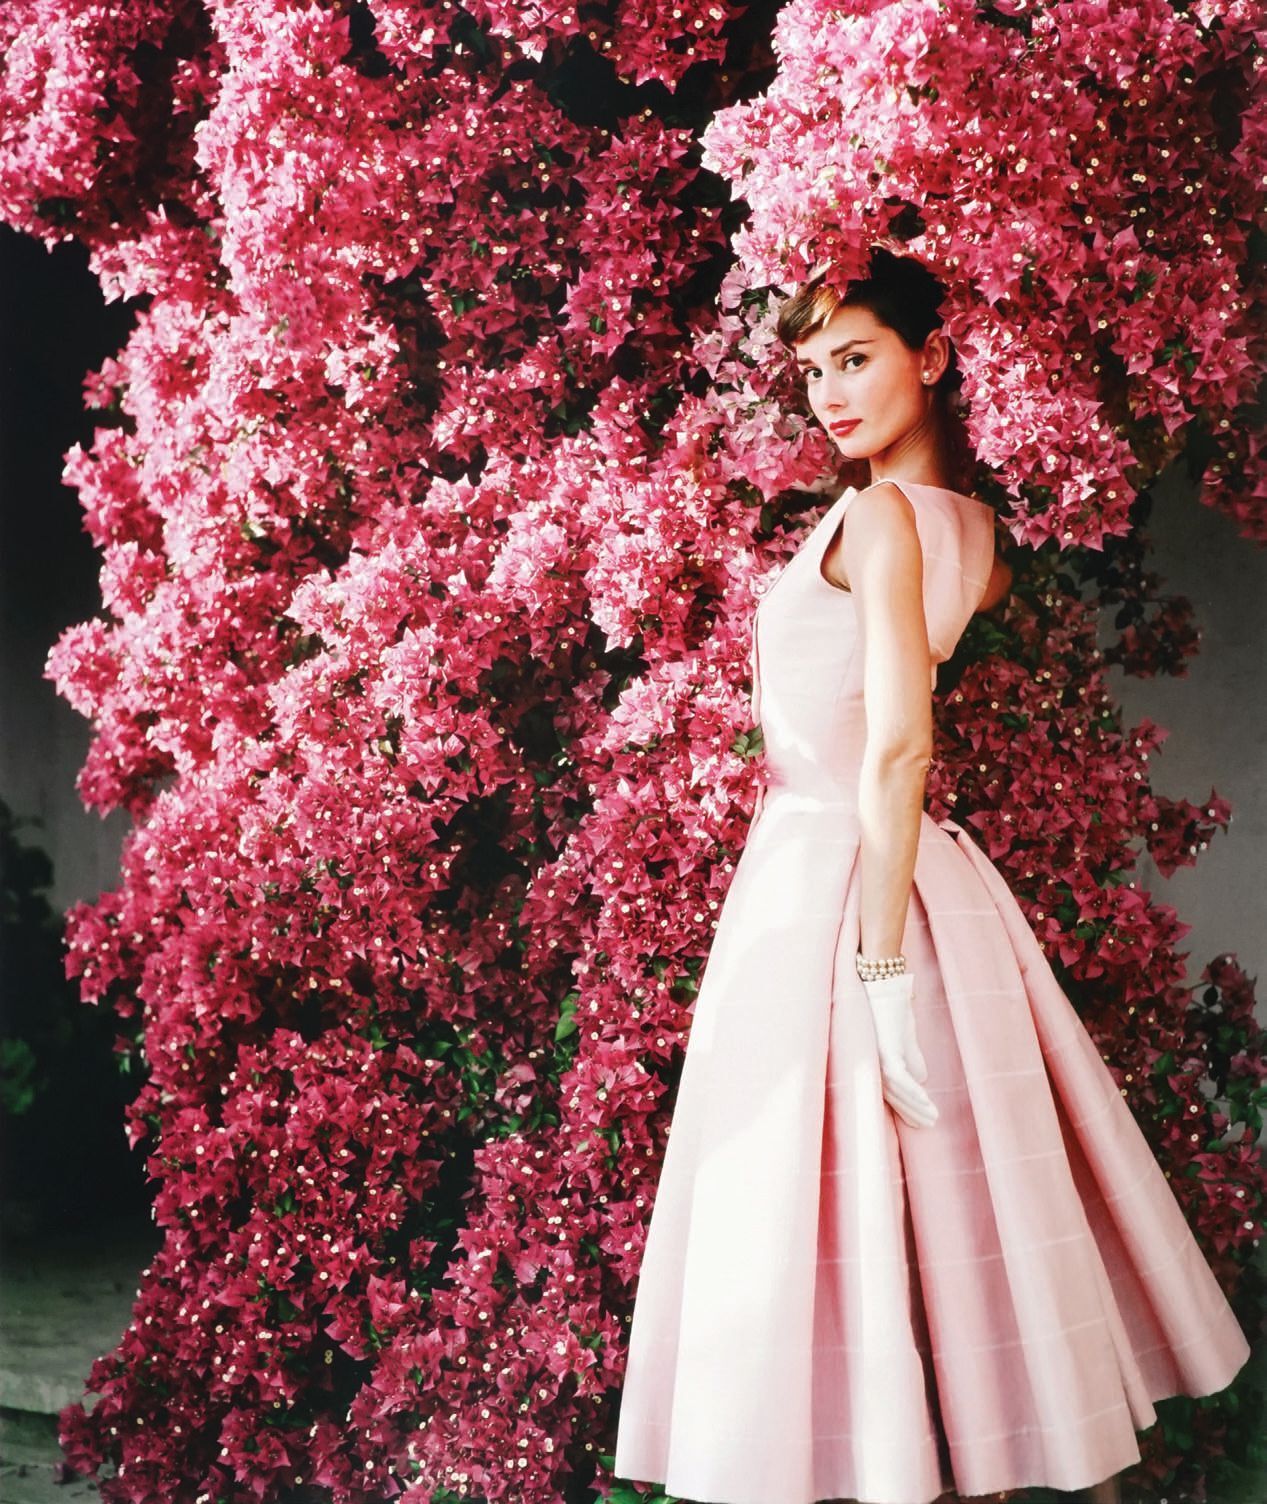 Norman Parkinson, “Audrey Hepburn With Flowers” (1955) PHOTO BY © NORMAN PARKINSON/ICONIC IMAGES, COURTESY OF PETER FETTERMAN GALLERY